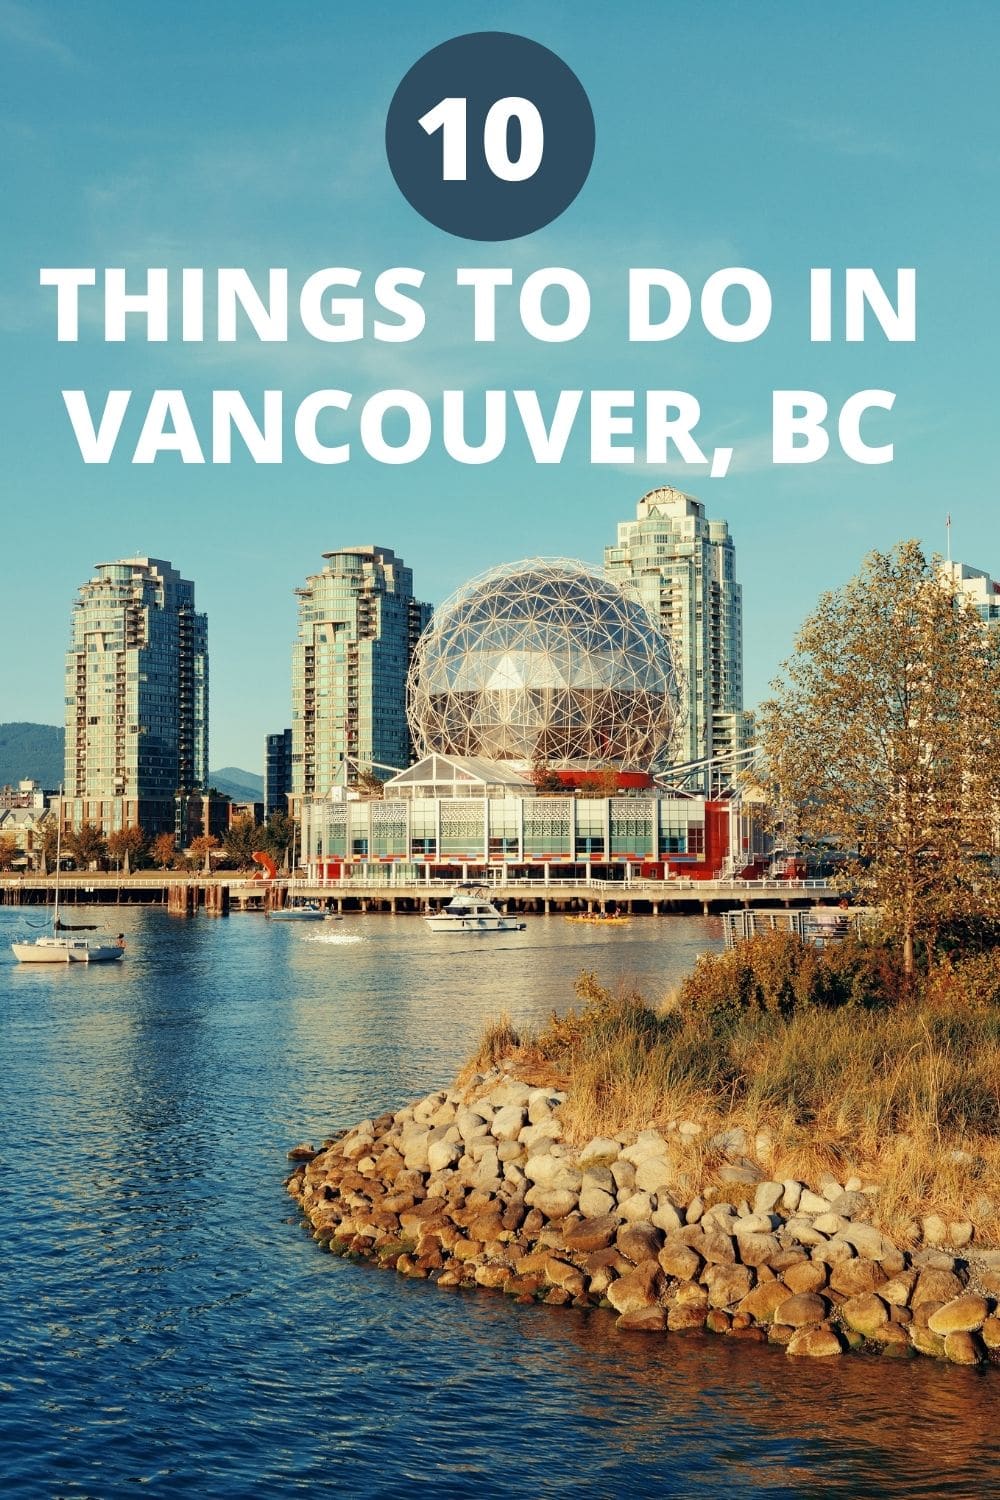 Things to do in Vancouver Vancouver, Canada is one of the most beautiful cities in the world. Here are 10 things to do in Vancouver from beaches to shopping to dining. #Vancouver #vancouverbc